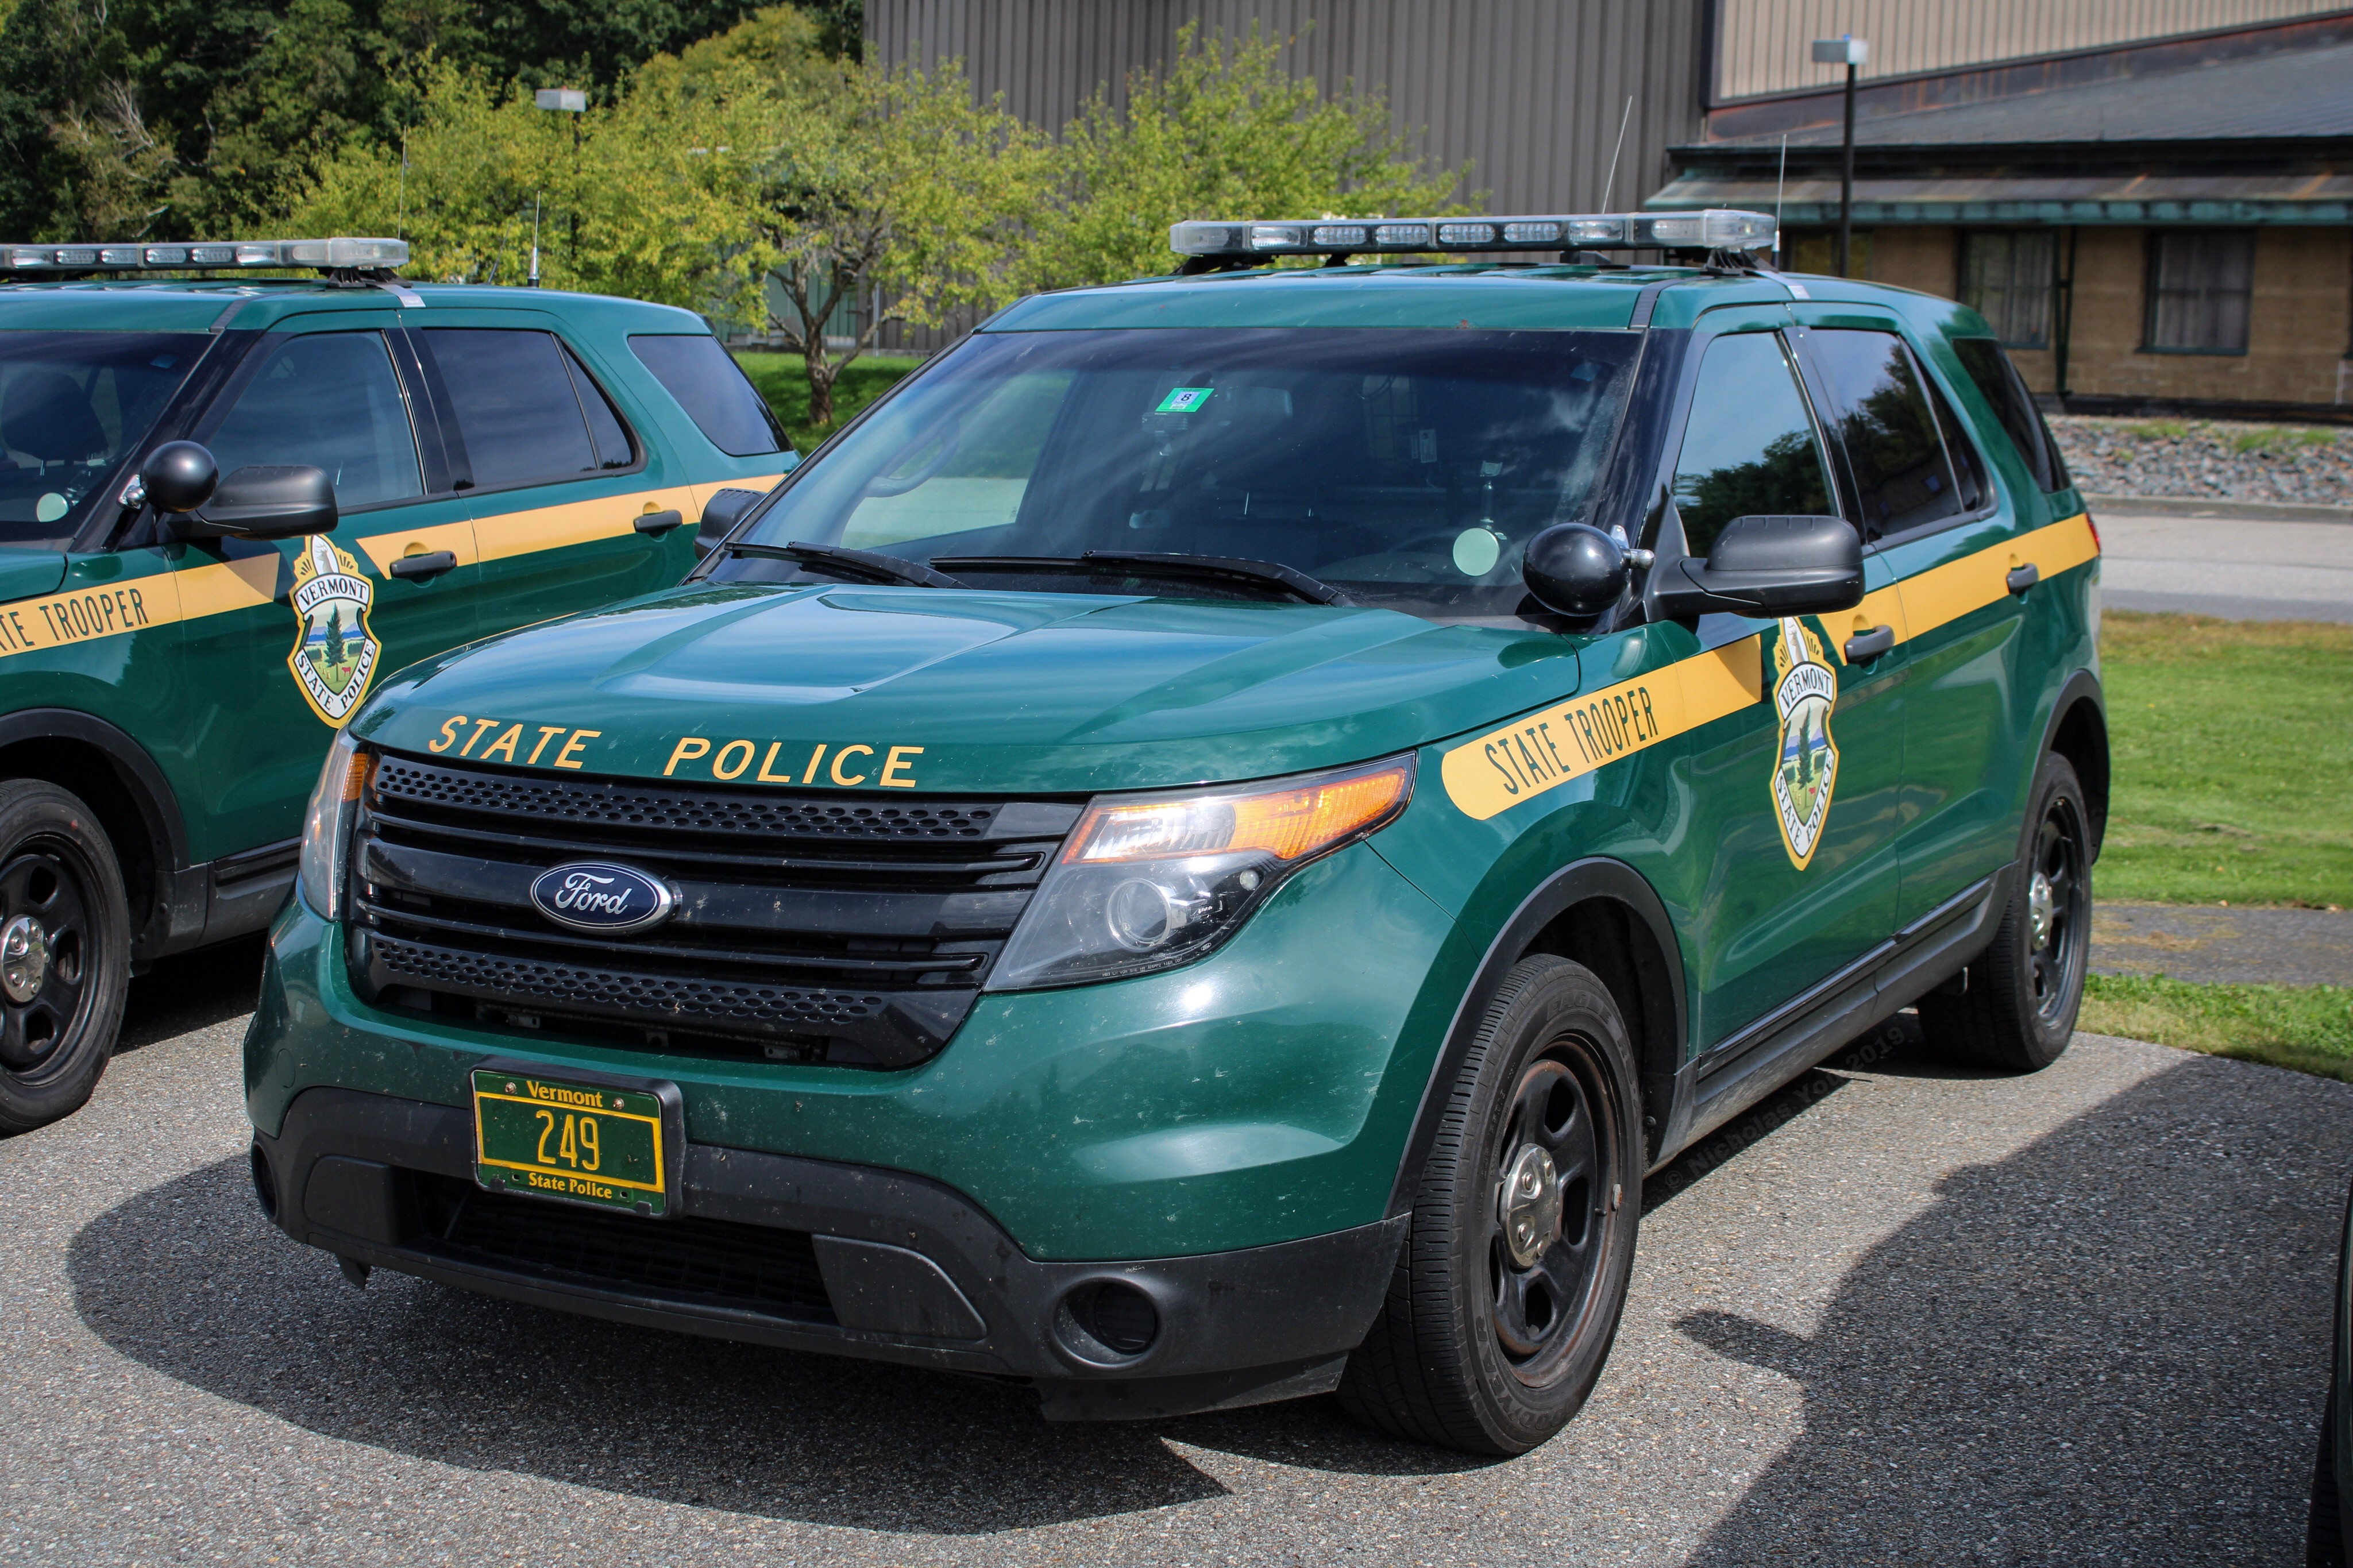 A photo  of Vermont State Police
            Cruiser 249, a 2013-2015 Ford Police Interceptor Utility             taken by Nicholas You